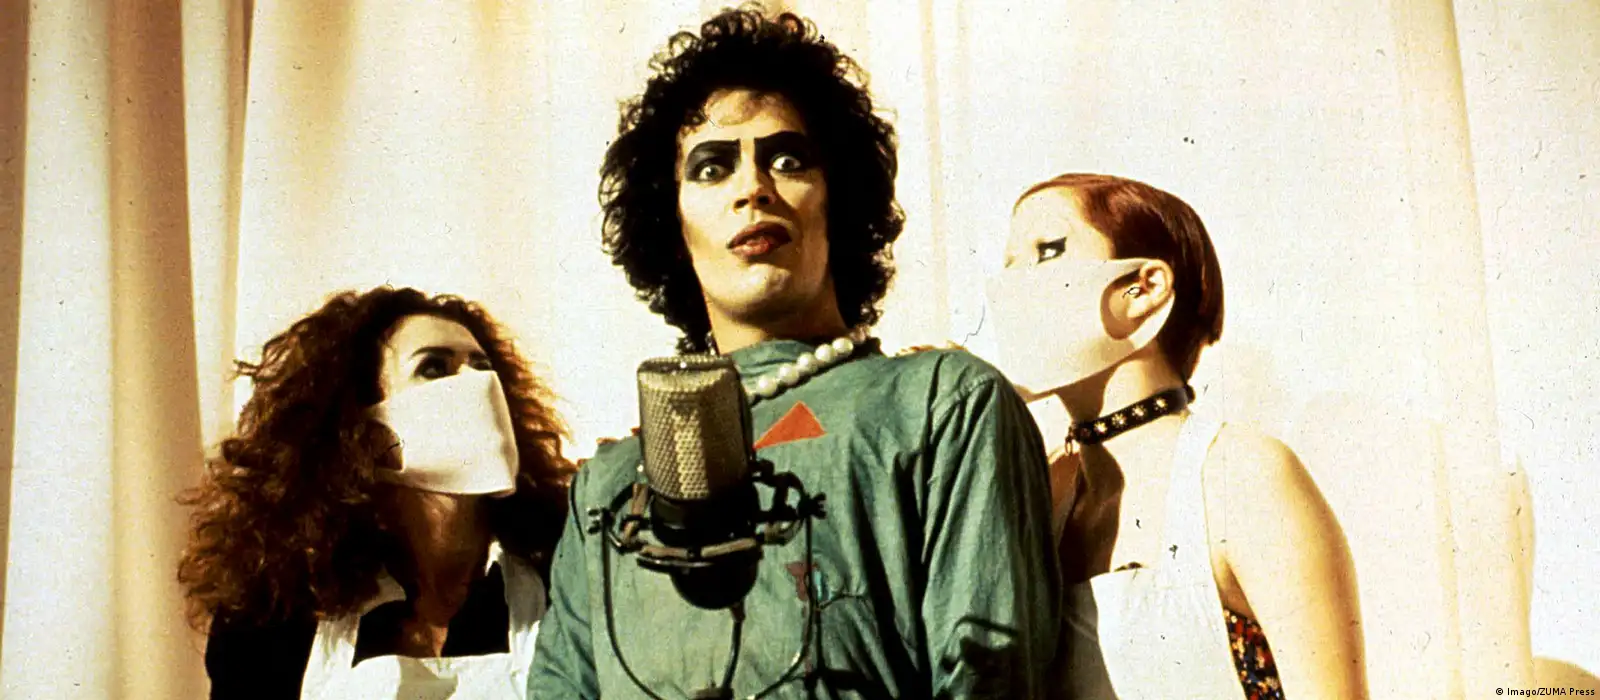 How 'The Rocky Horror Picture Show' Became an Enduring, $100 Million Brand